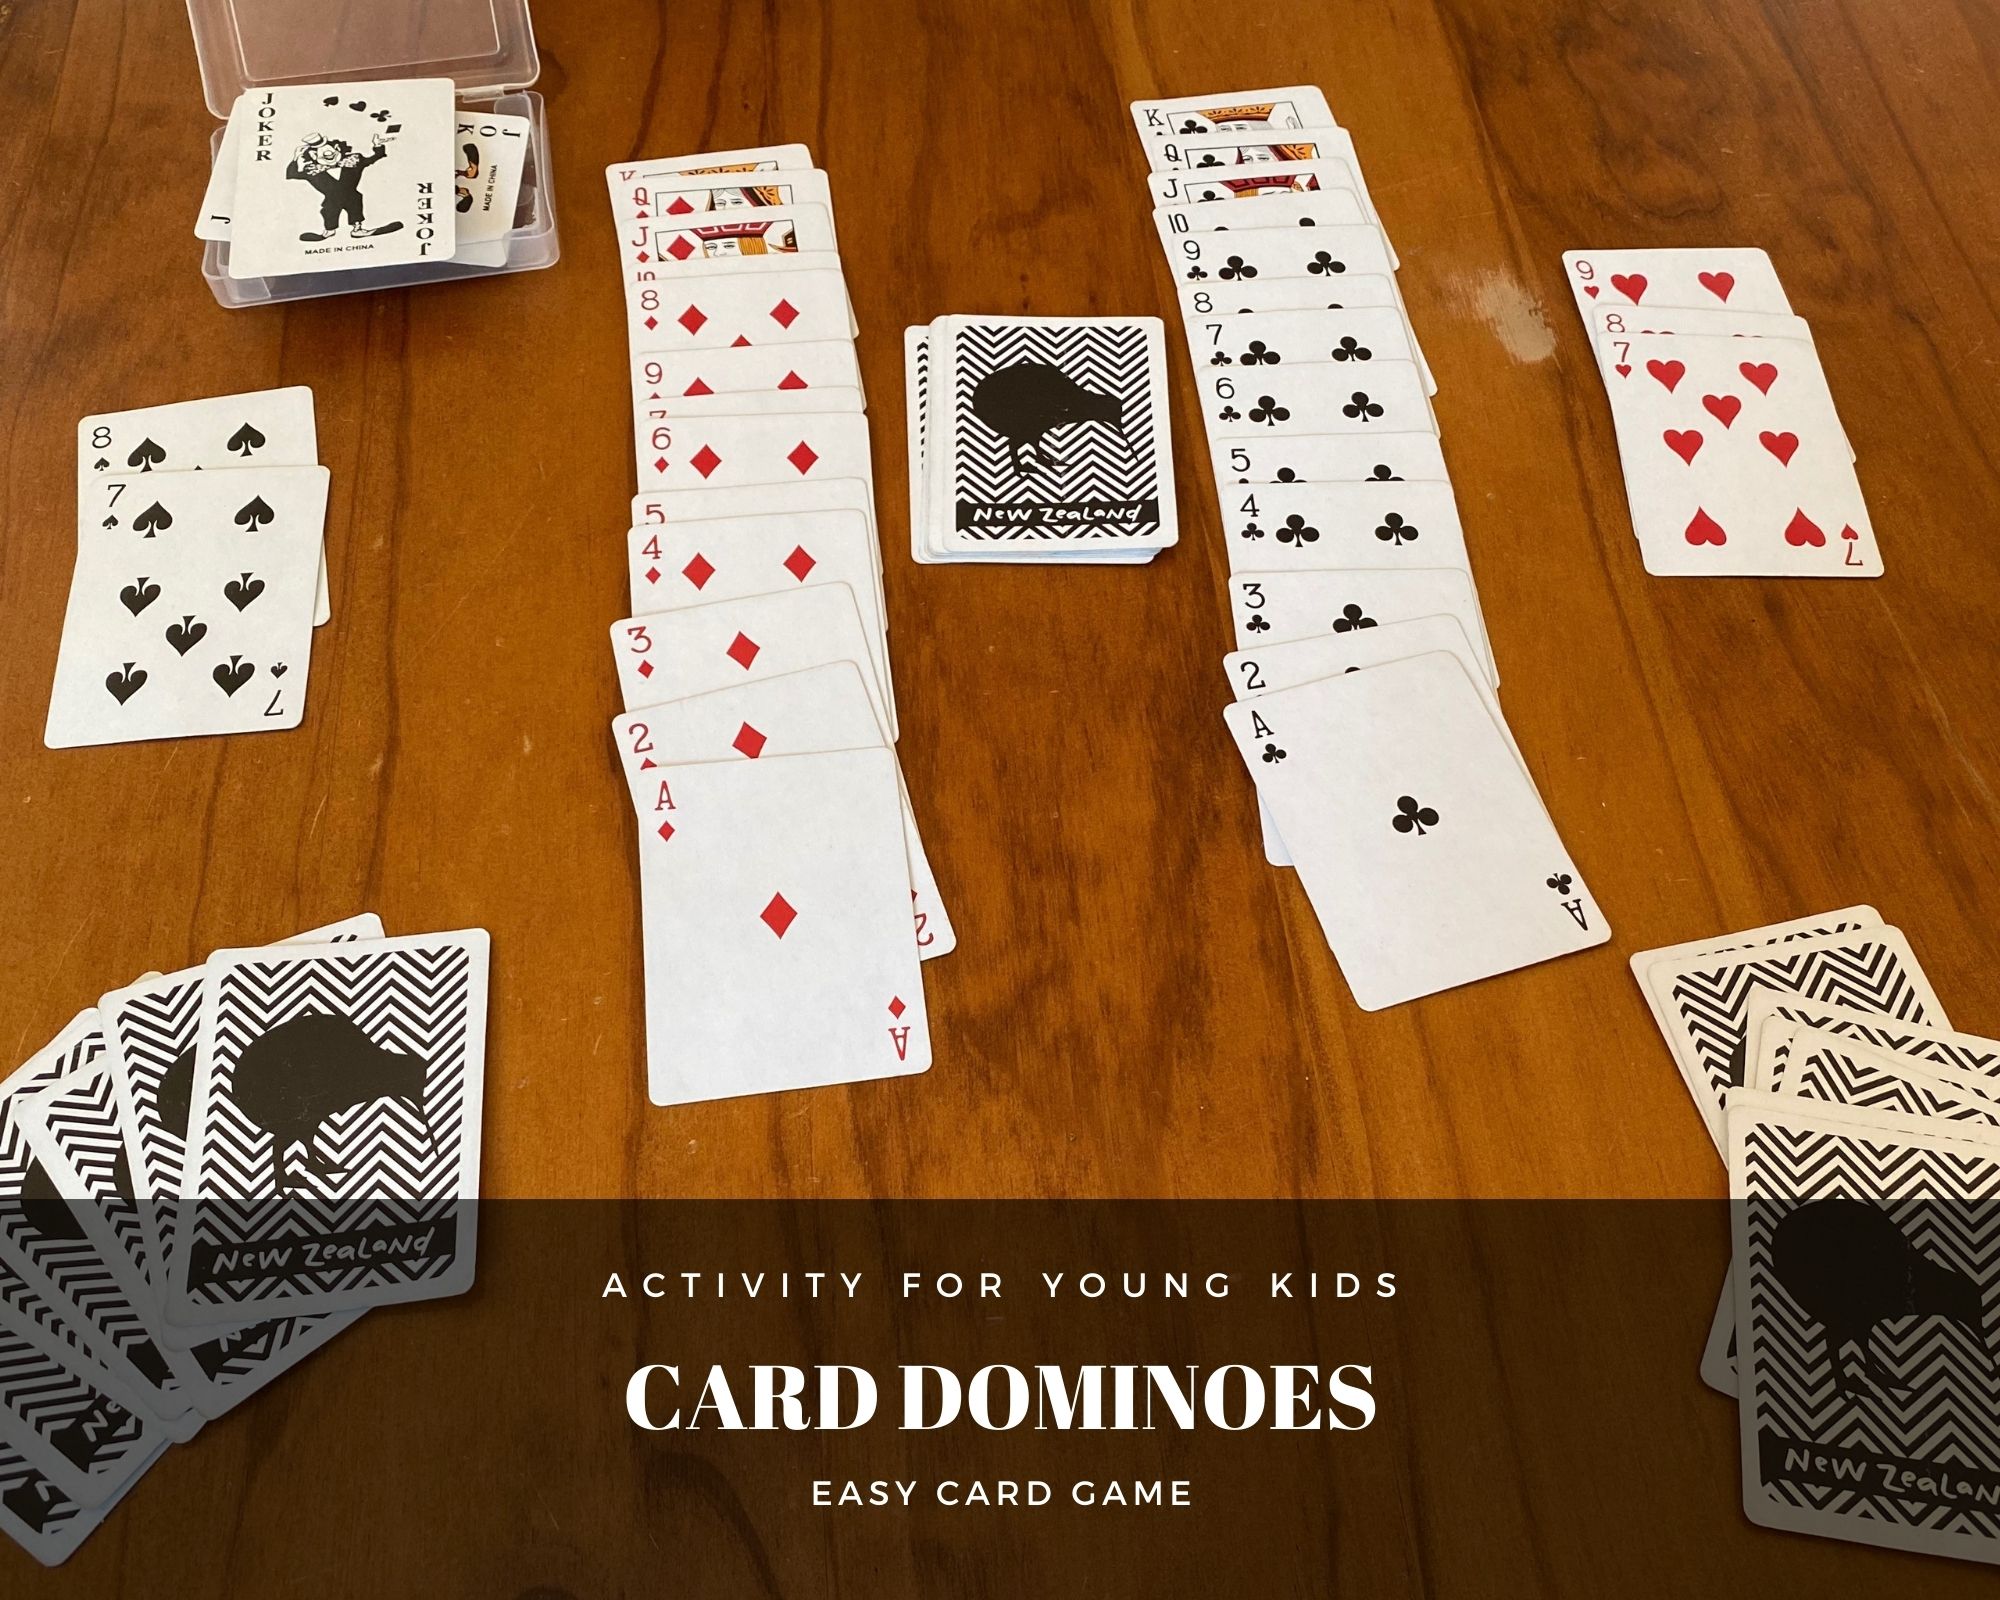 Card Dominoes, the Card Game for Young Kids